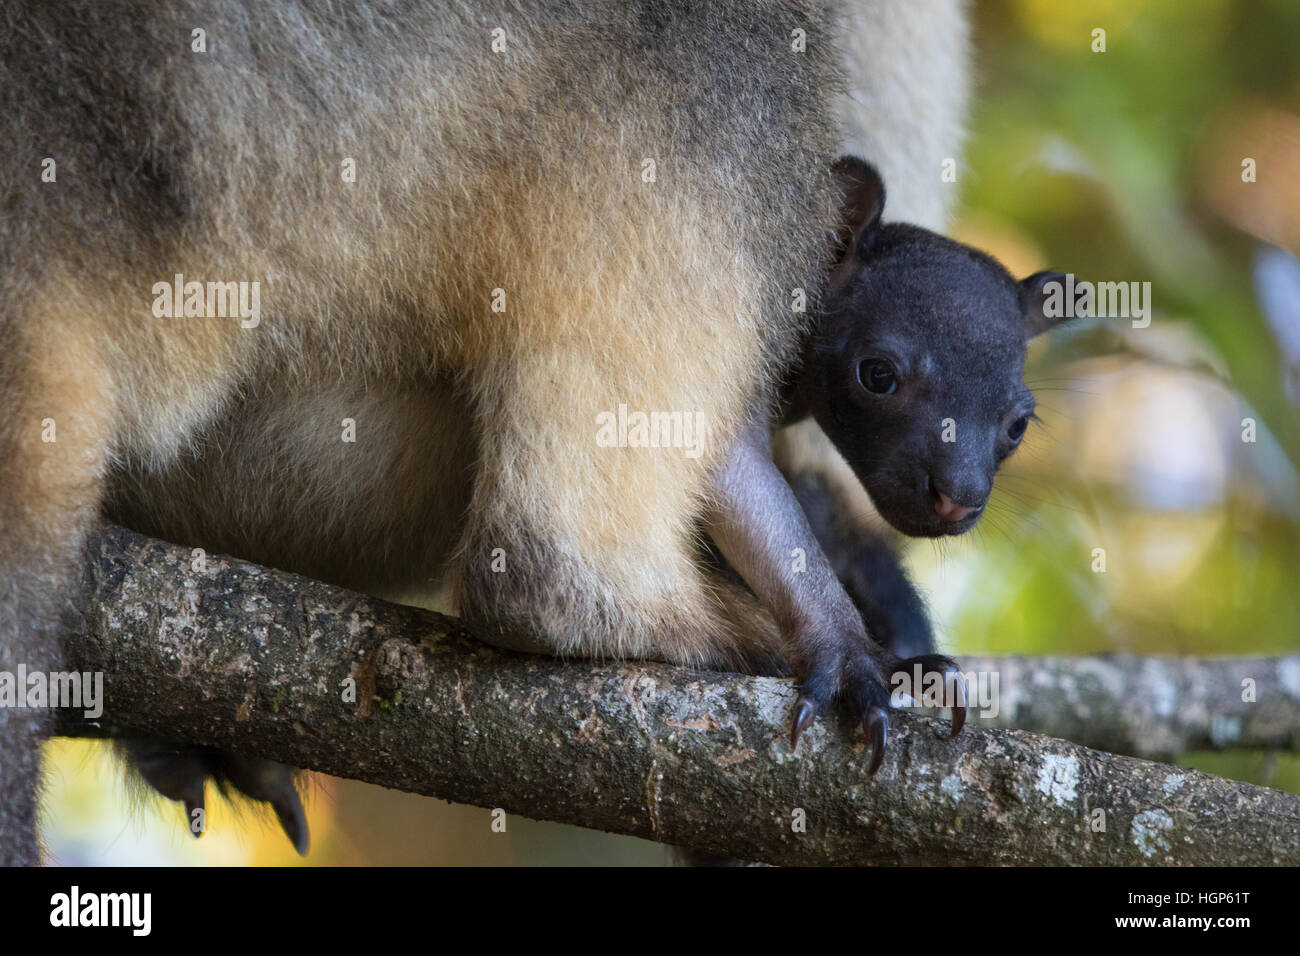 Lumholtz's Tree Kangaroo (Dendrolagus lumholtzi). Very young joey looking out of its mother pouch. Stock Photo